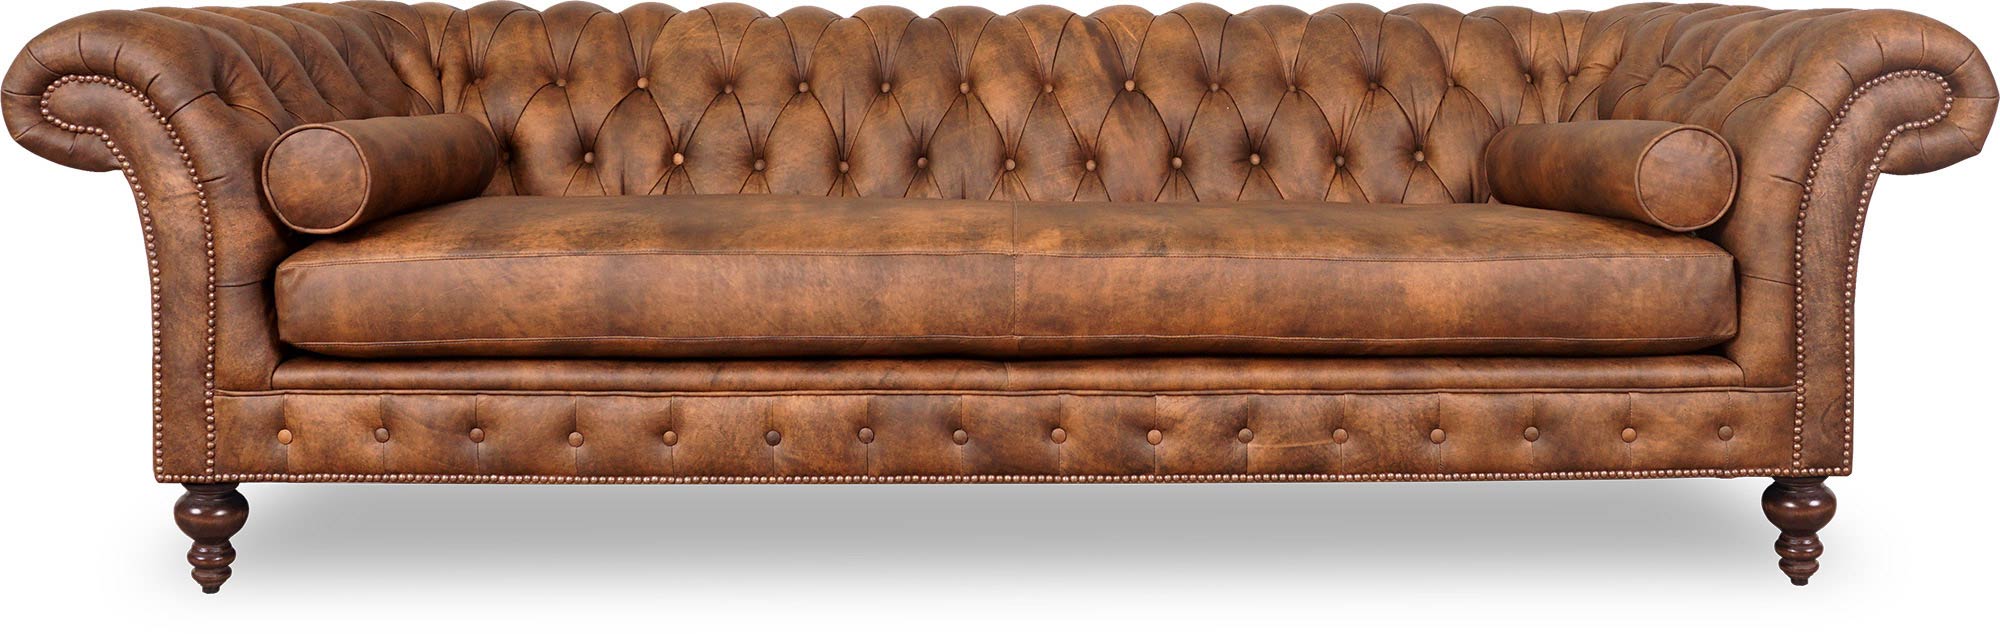 103 Lucille Sofa in Run Wyld Gentle Fawn Performance Leather with Bolster Pillows